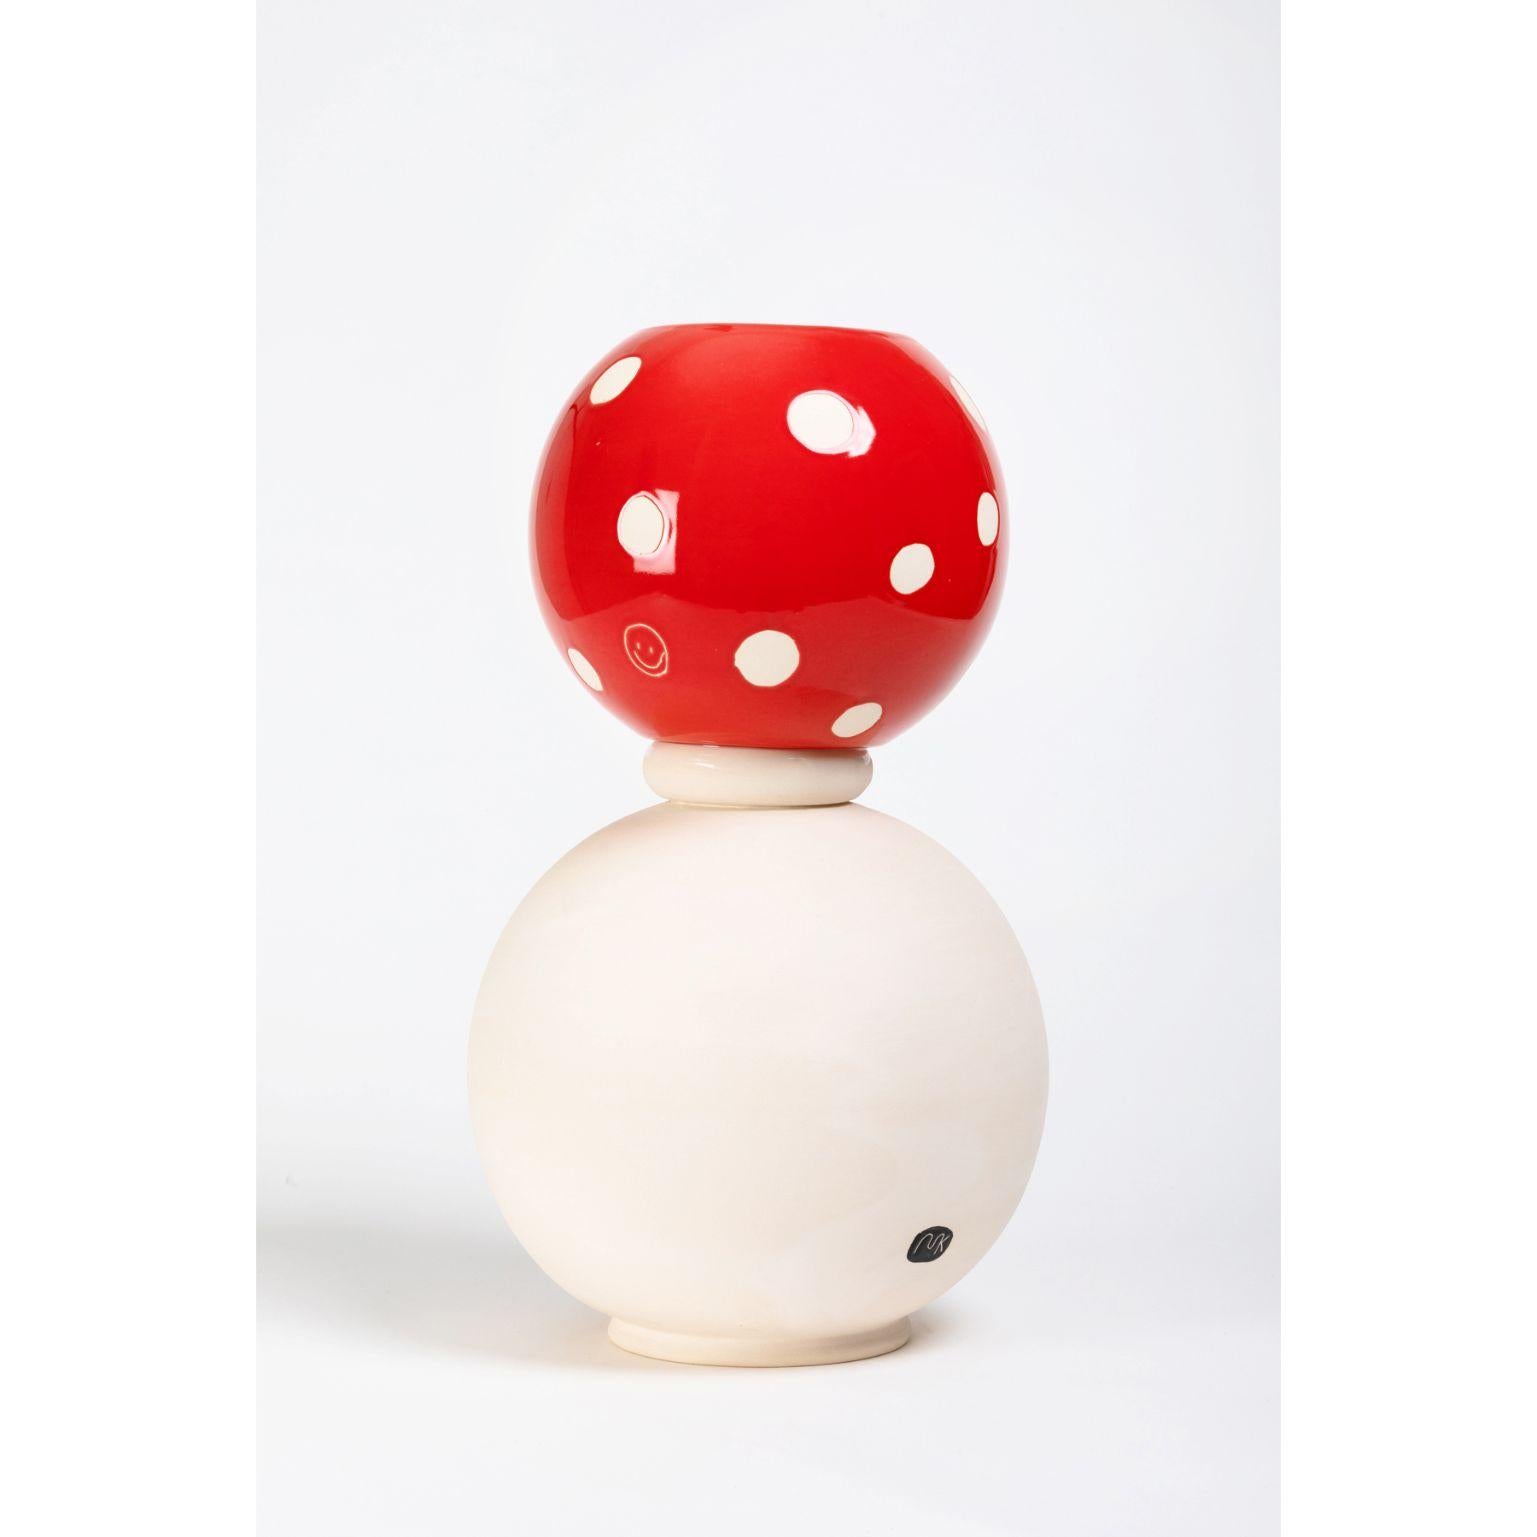 Miki pop ceramic sculpture - mushroom by Malwina Konopacka
Unique sculpture ( Decorated and hand-painted by the artist )
Materials: Impregnated ceramics, sgraffito red
Dimensions: D25, H42 cm
 
POP is a new collection of ceramic vases and